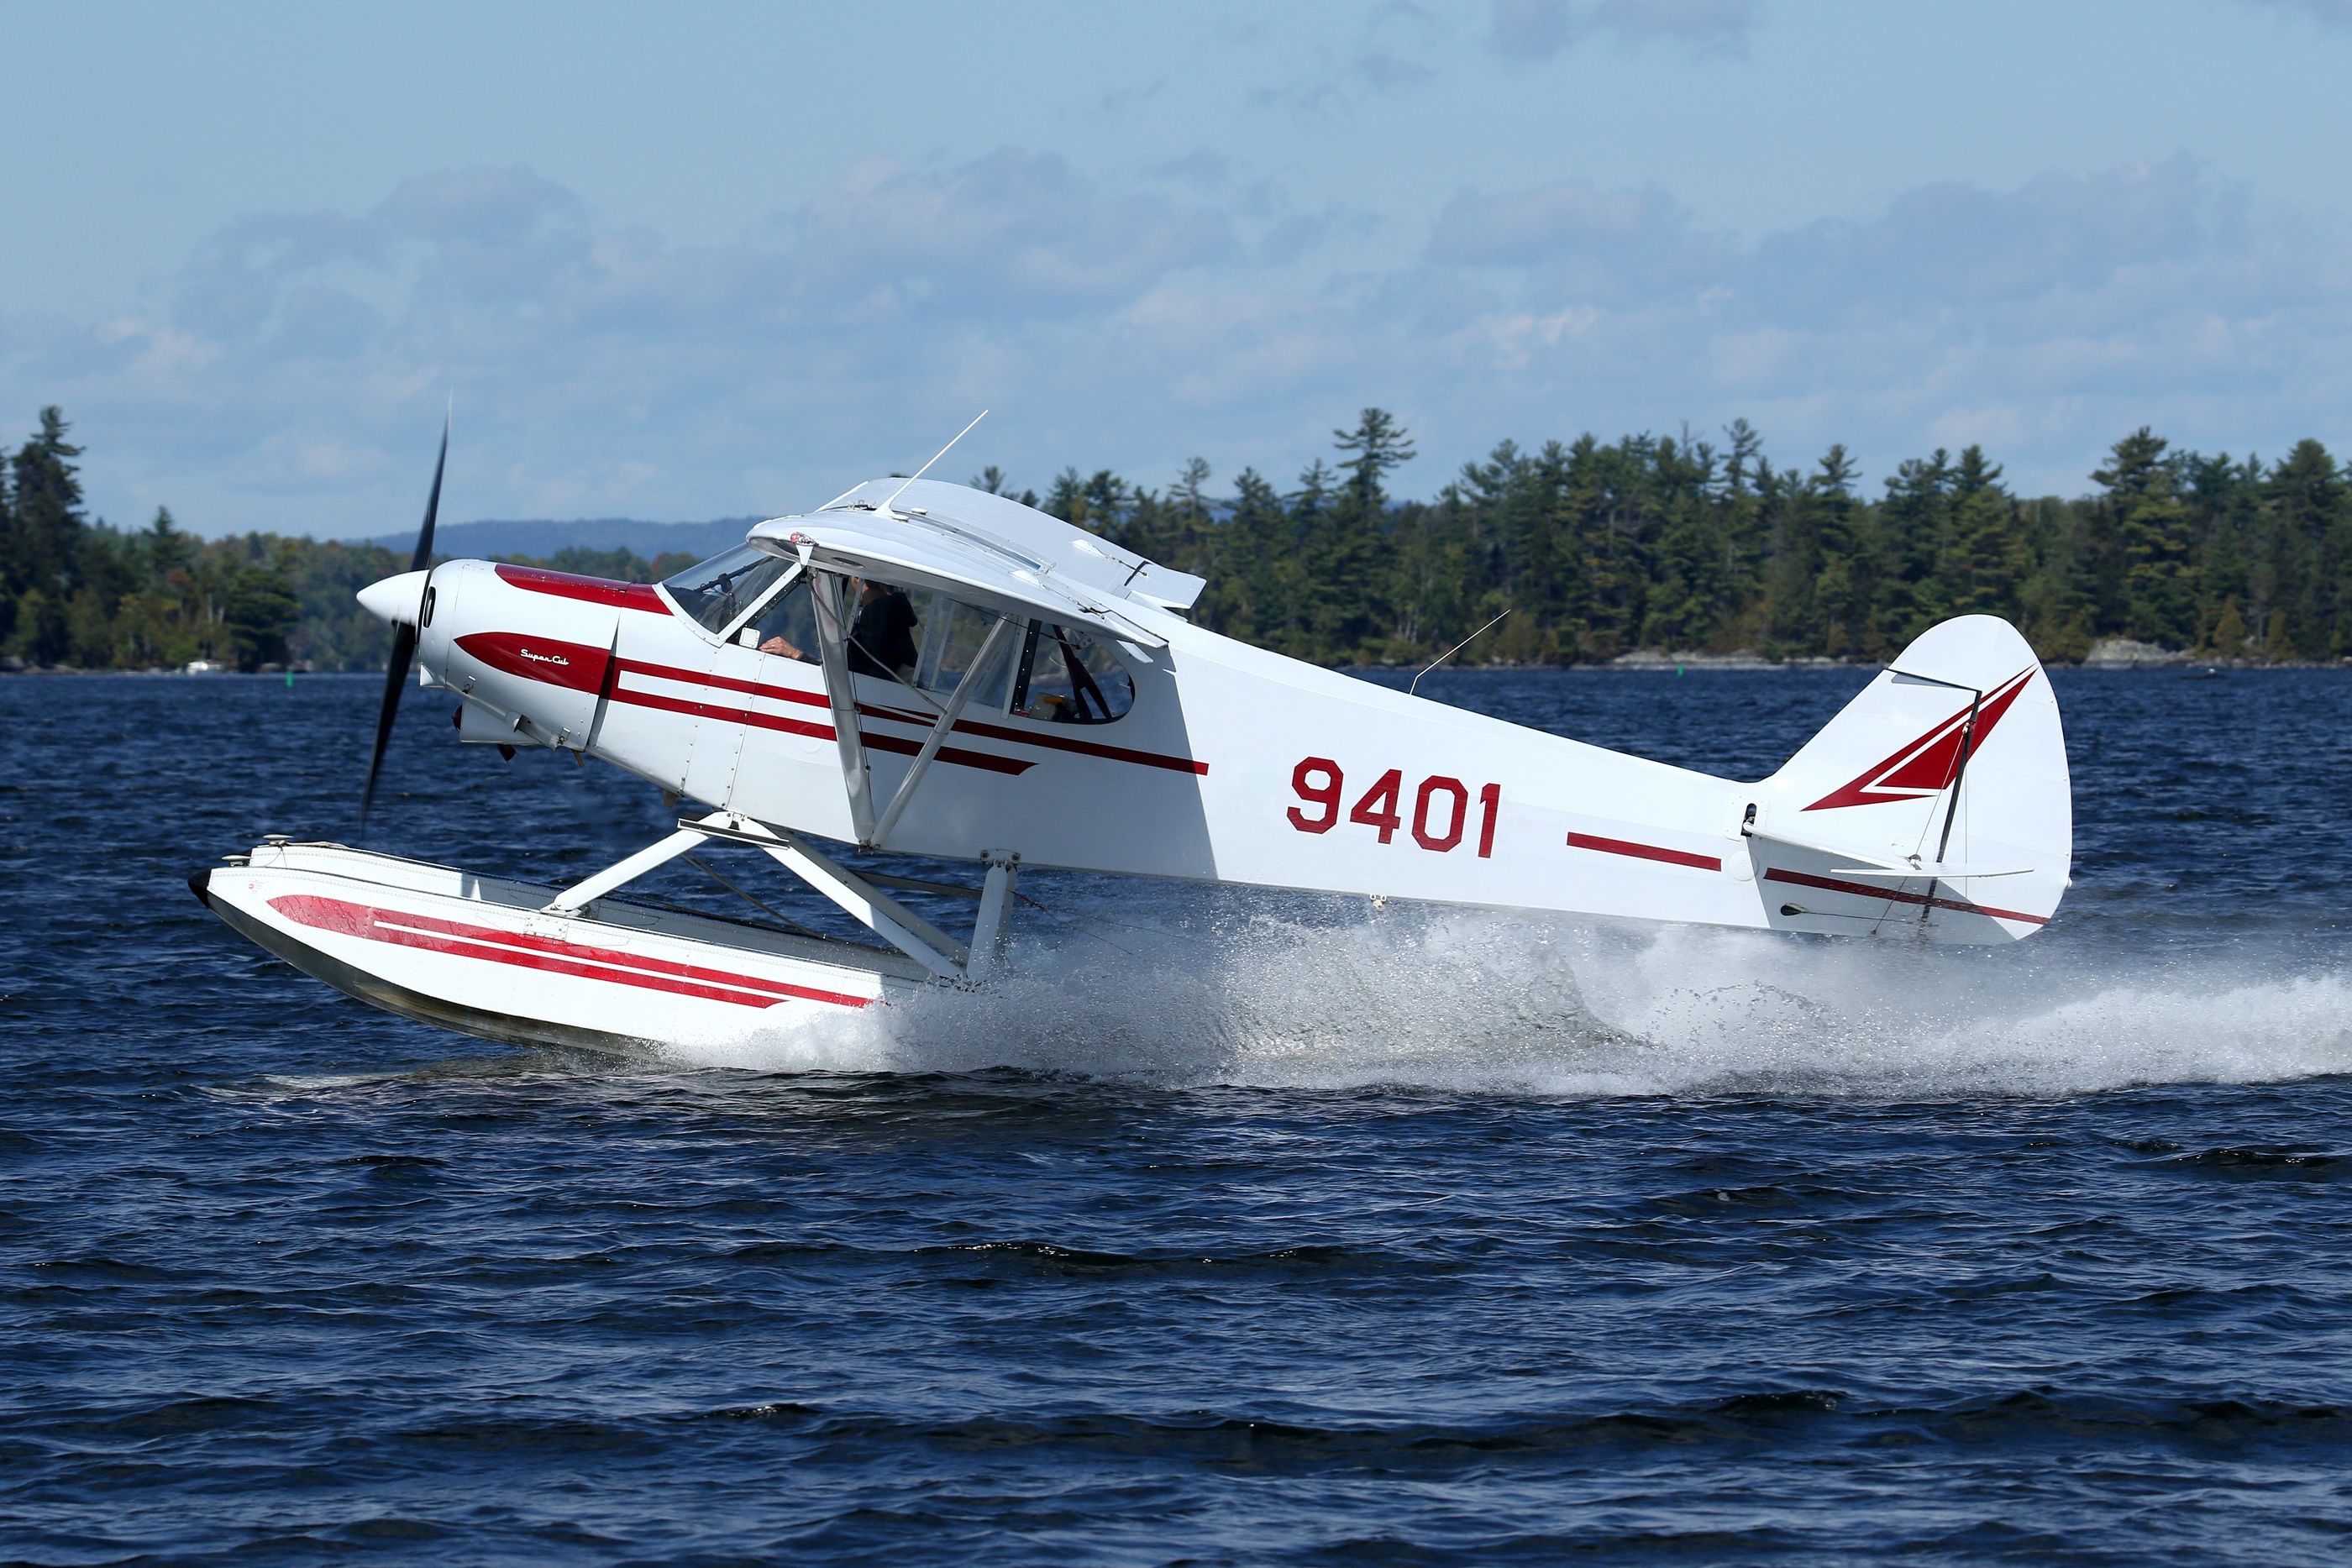 A Piper PA-18 Super Cub Float Plane, Taking Off from Moosehead Lake, Greenville, ME, USA. (September 2021)